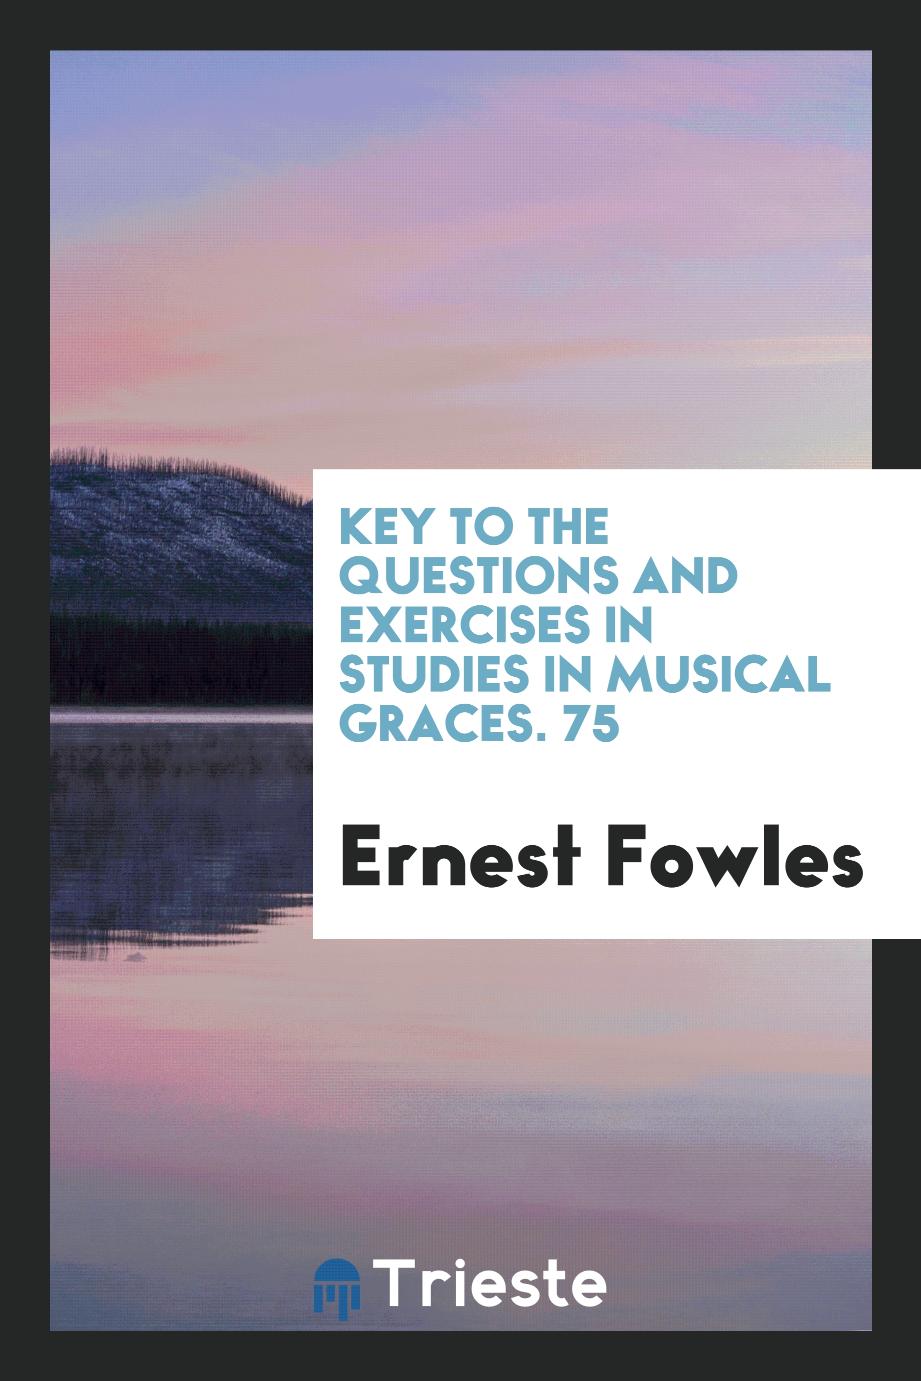 Key to the Questions and Exercises in Studies in Musical Graces. 75